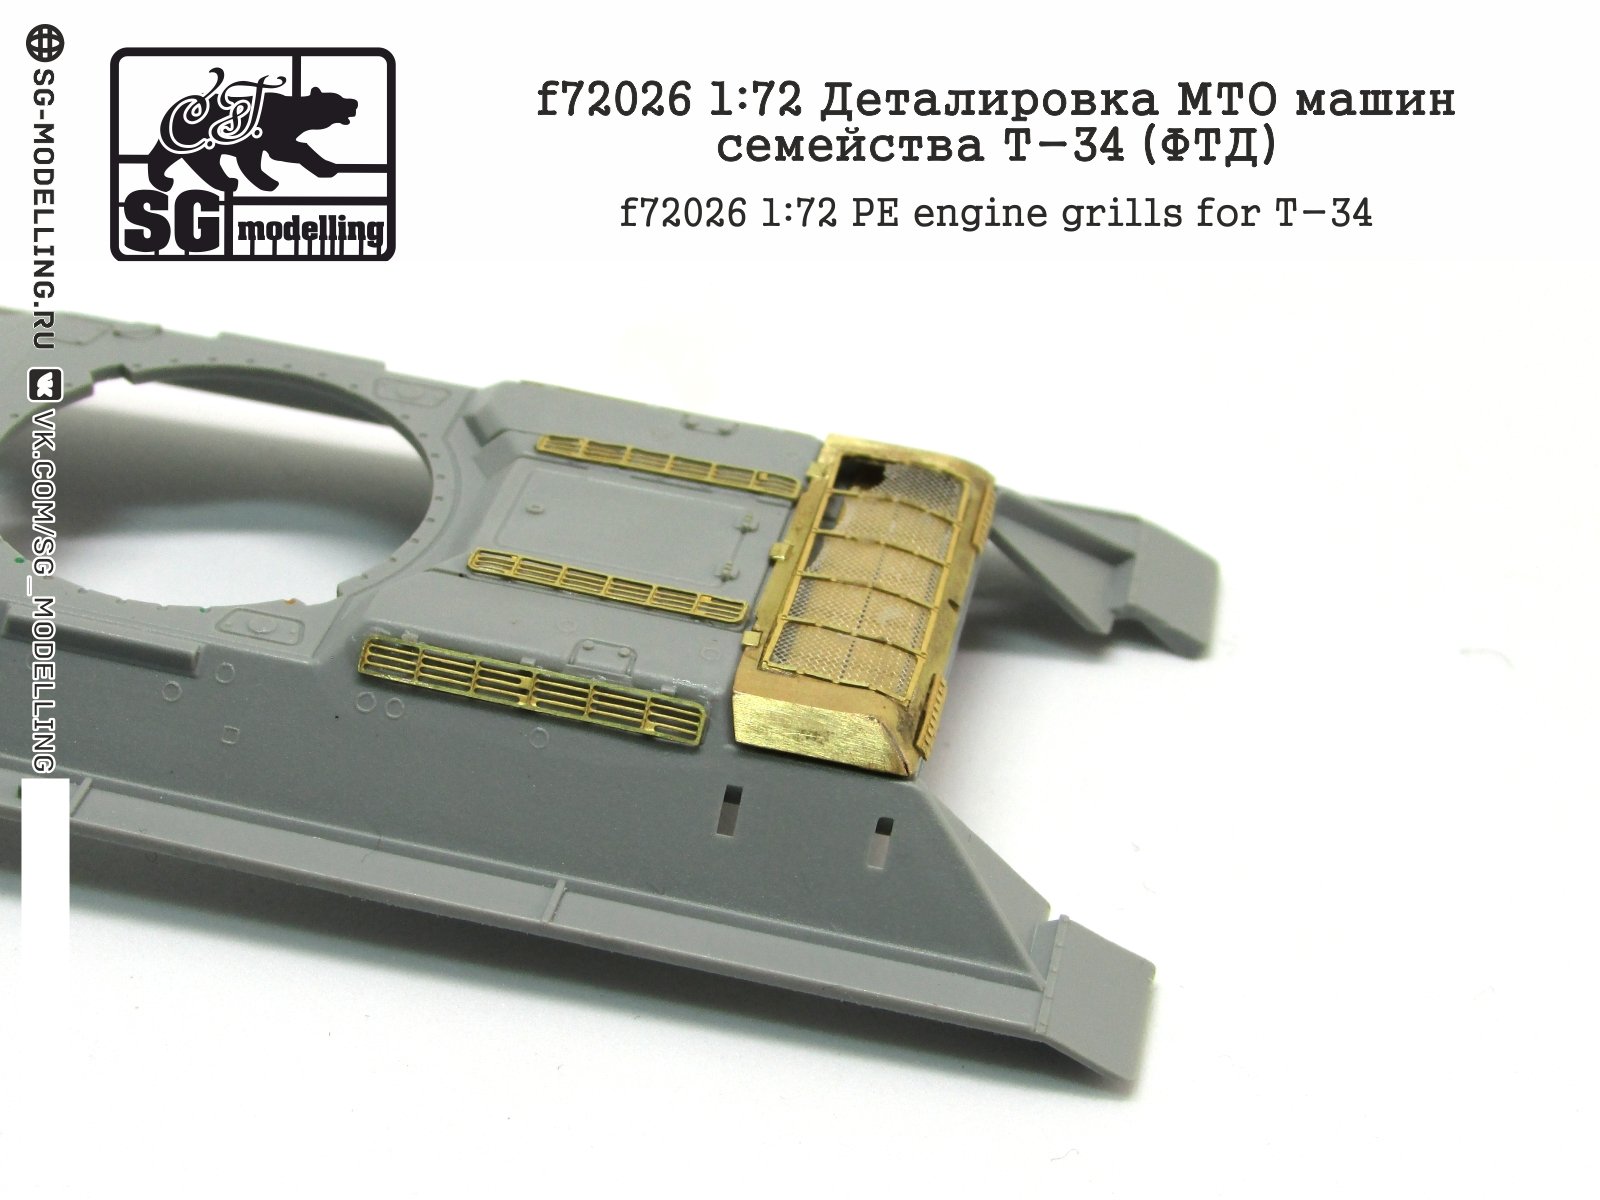 F72026 1:72 Detailing MTO Machines of the T-34 family (FTD) - imodeller.store